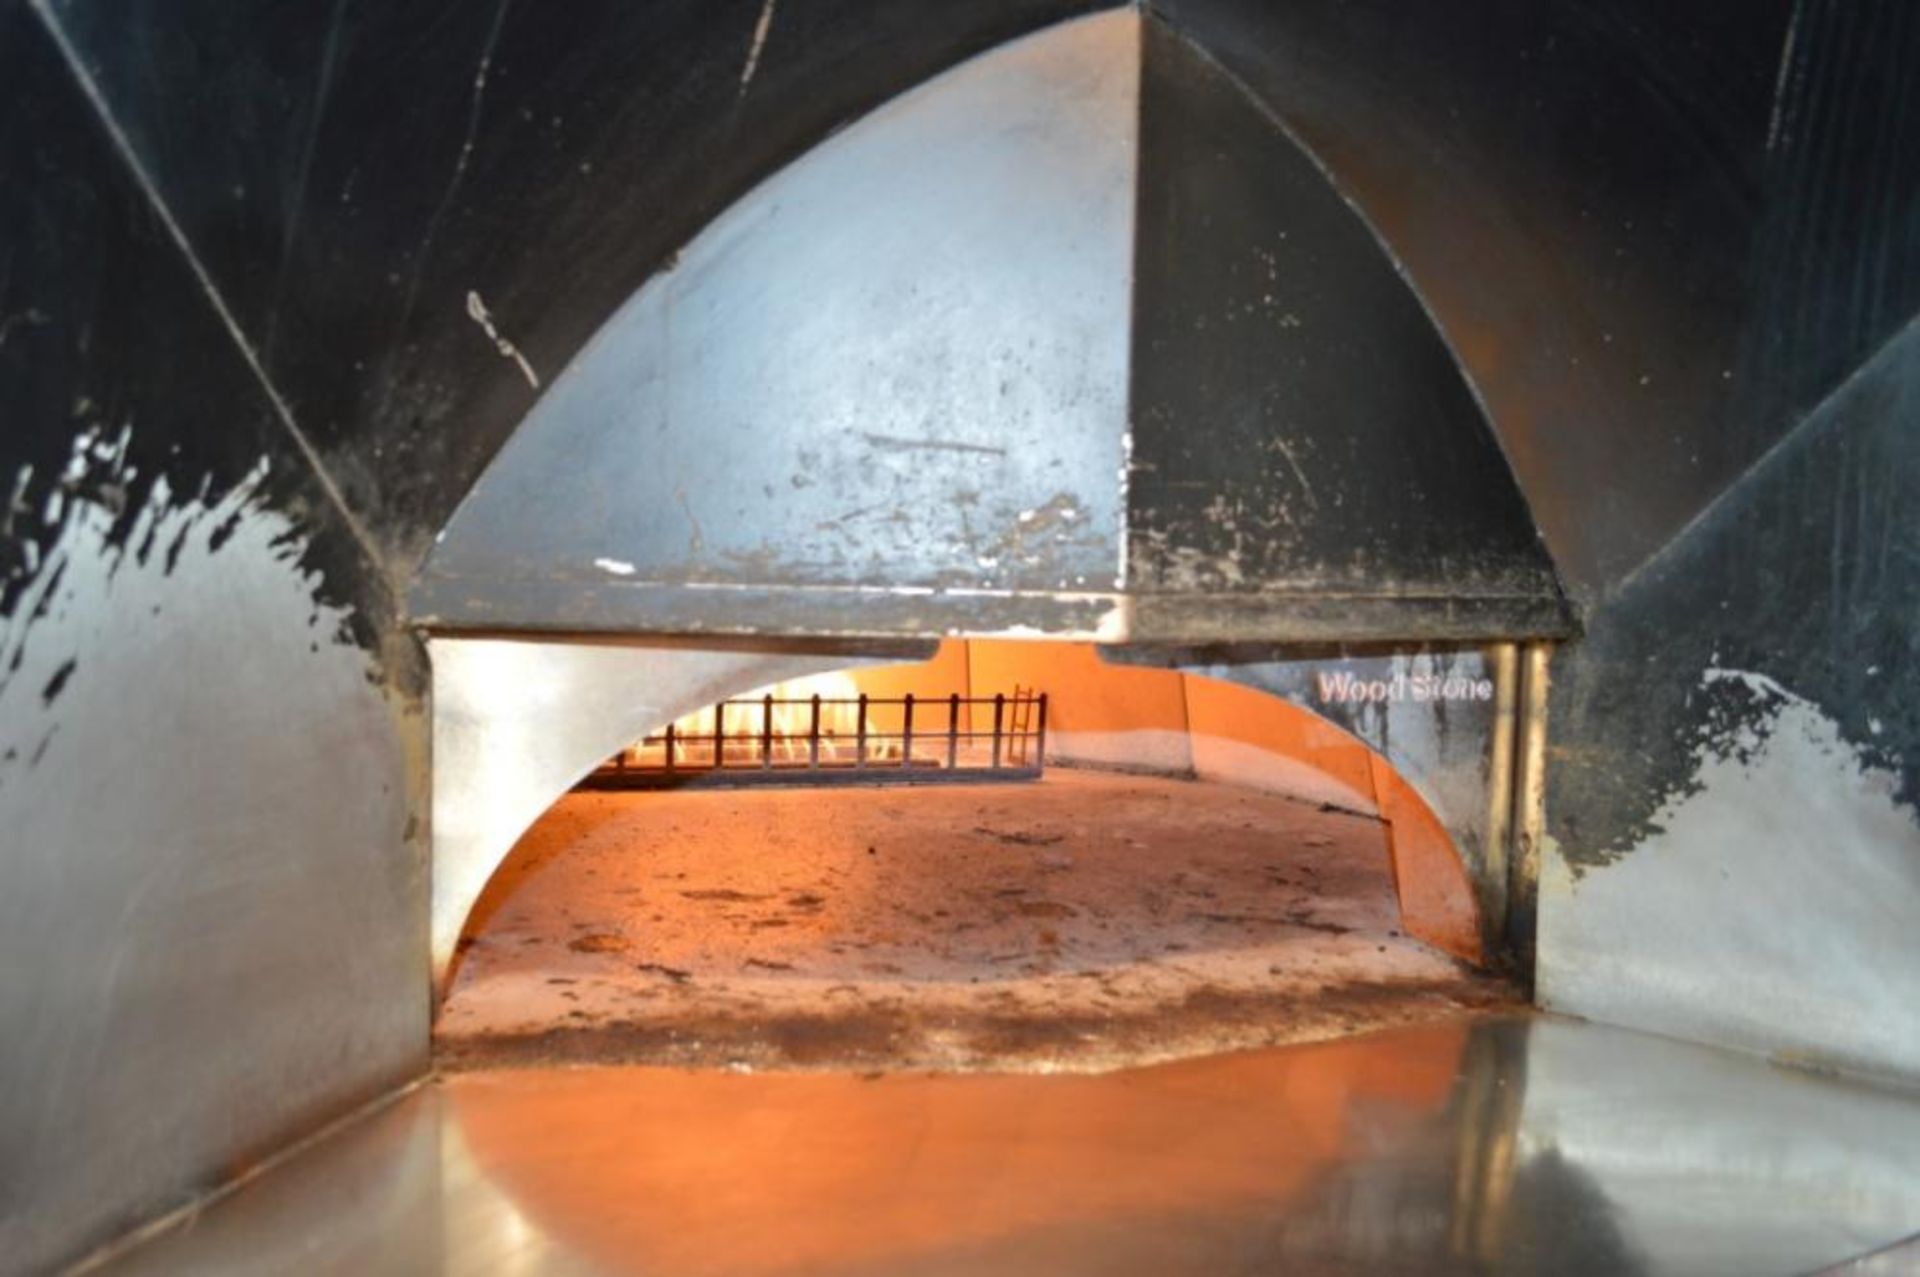 1 x Wood Stone Commercial Gas Fired Pizza Oven - CL011 - Location: Altrincham WA14 - Image 7 of 16